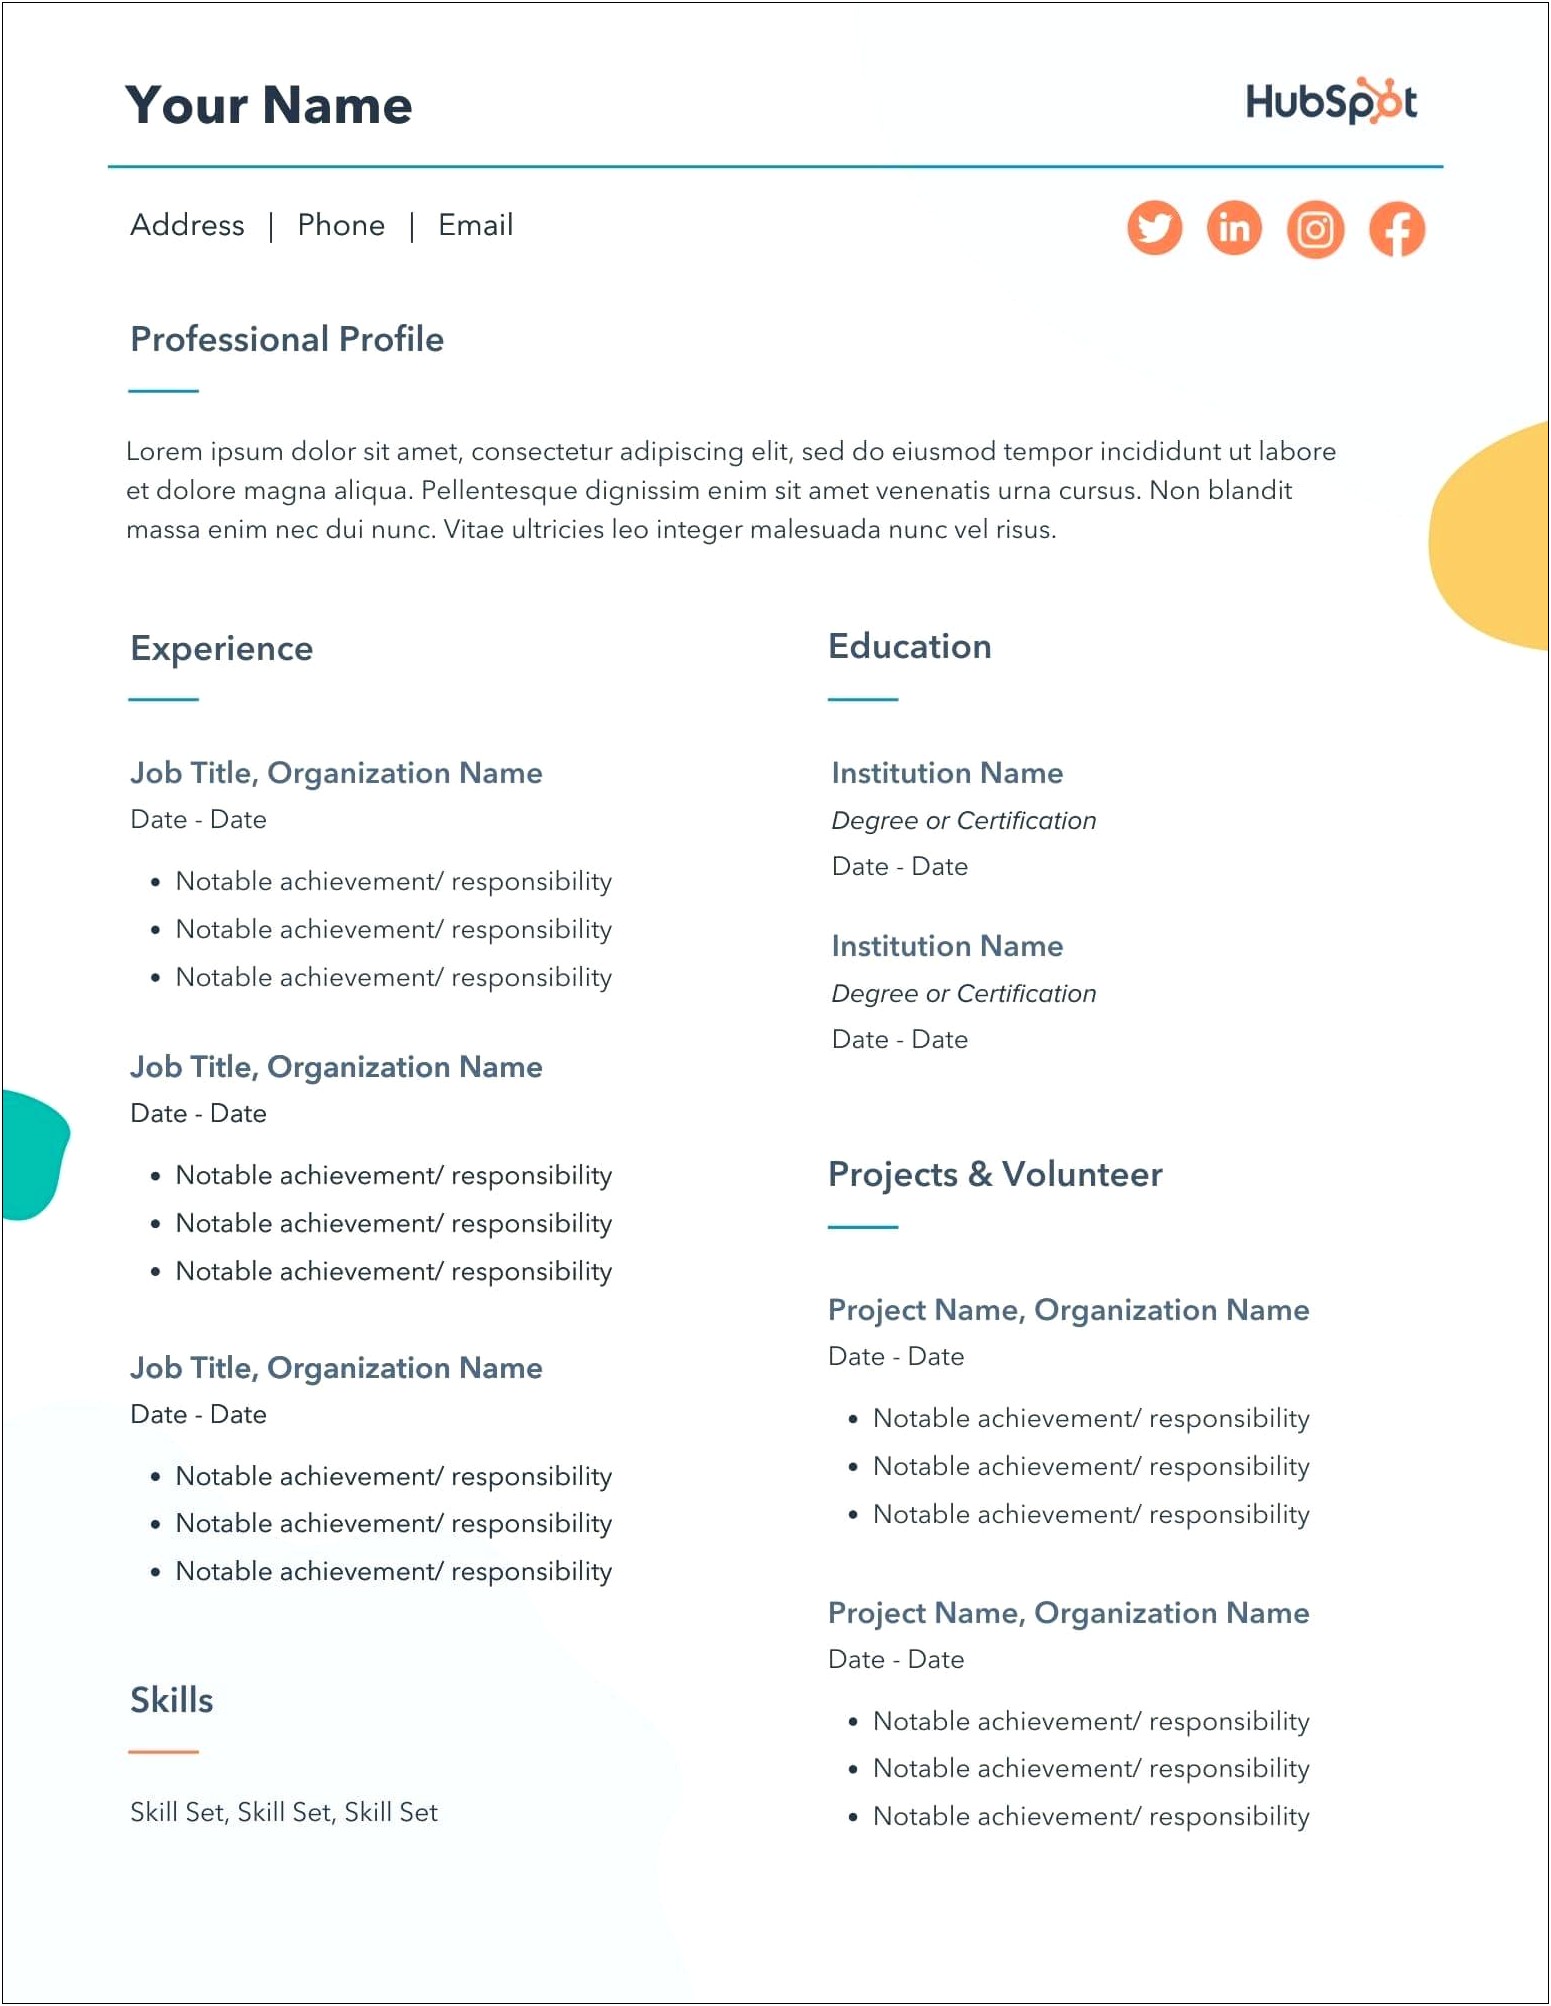 Websites That Are Free To Make Resumes